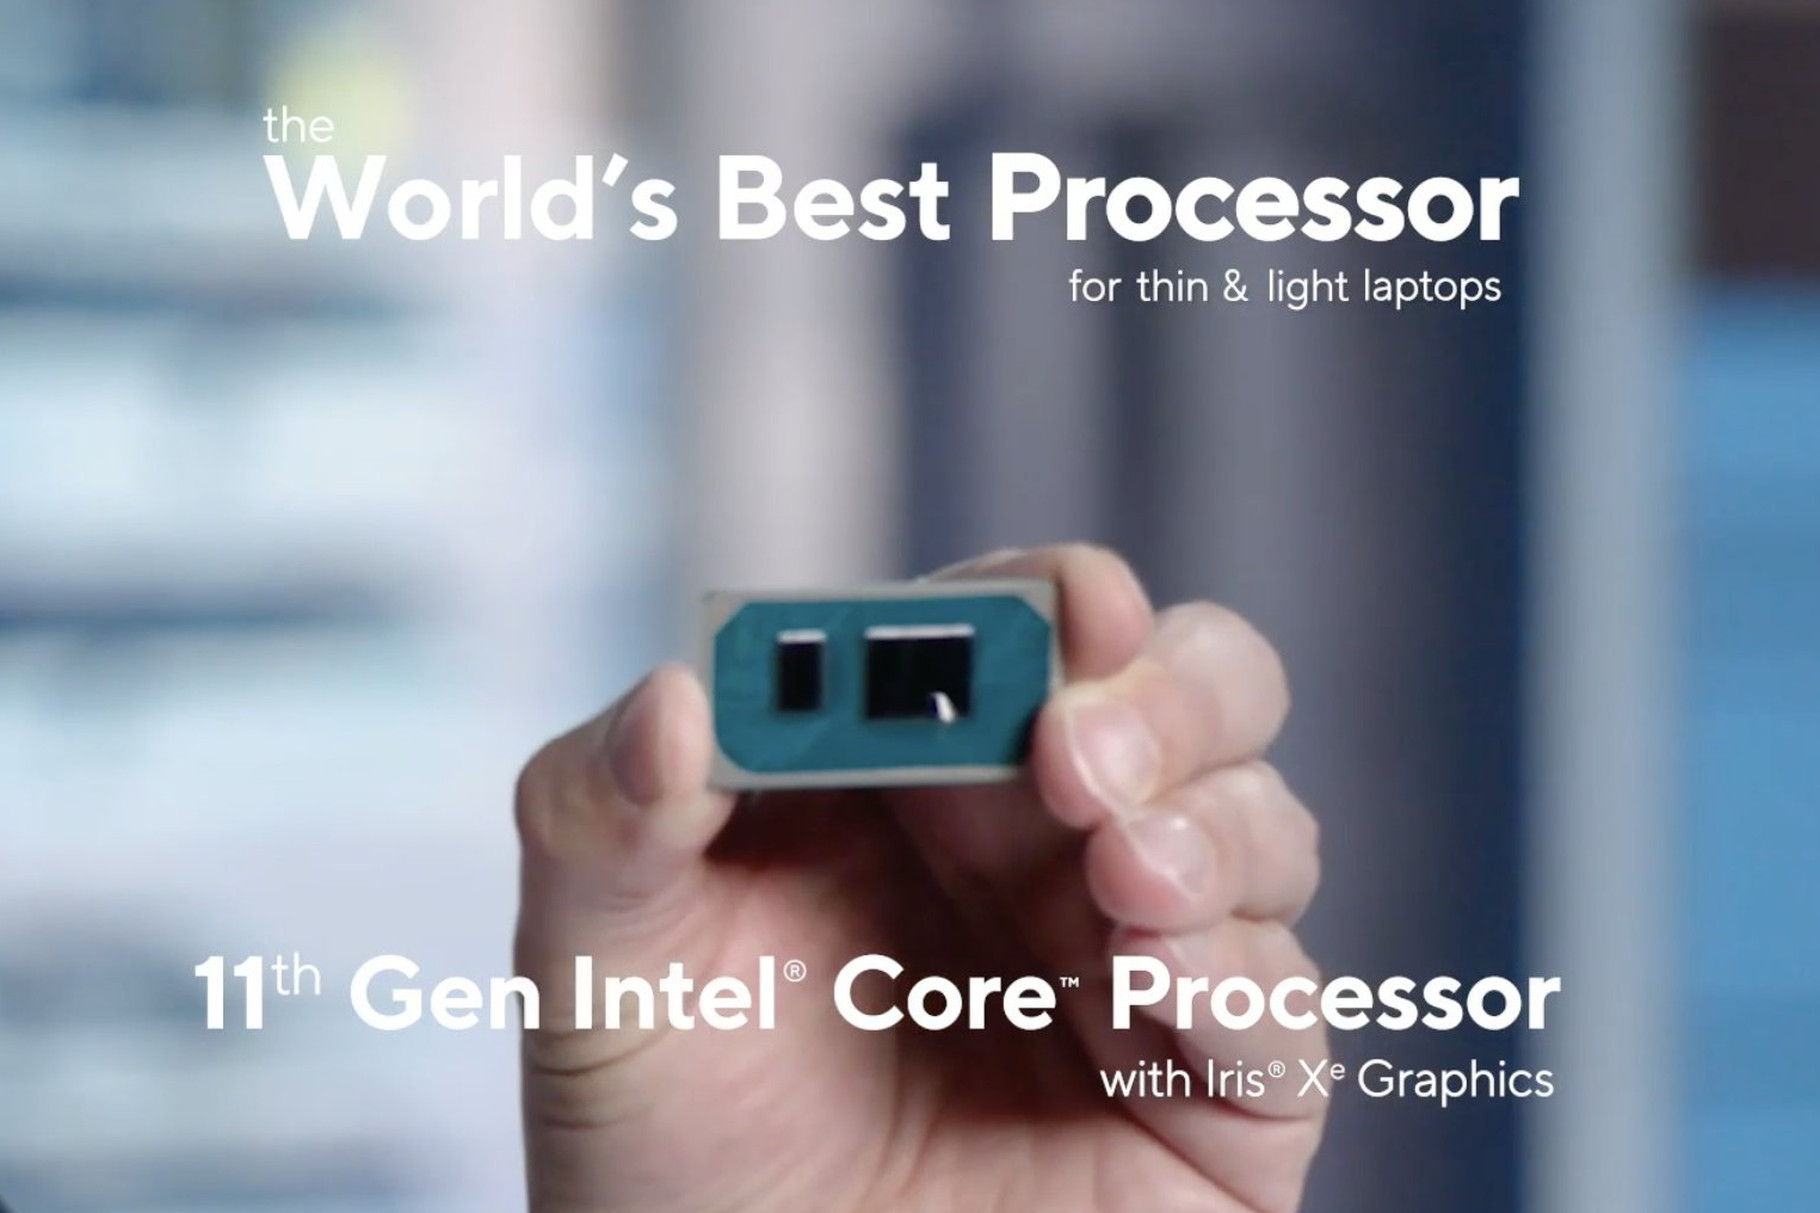 Intel announces its new 11th Gen Tiger Lake CPUs, available on laptops this fall